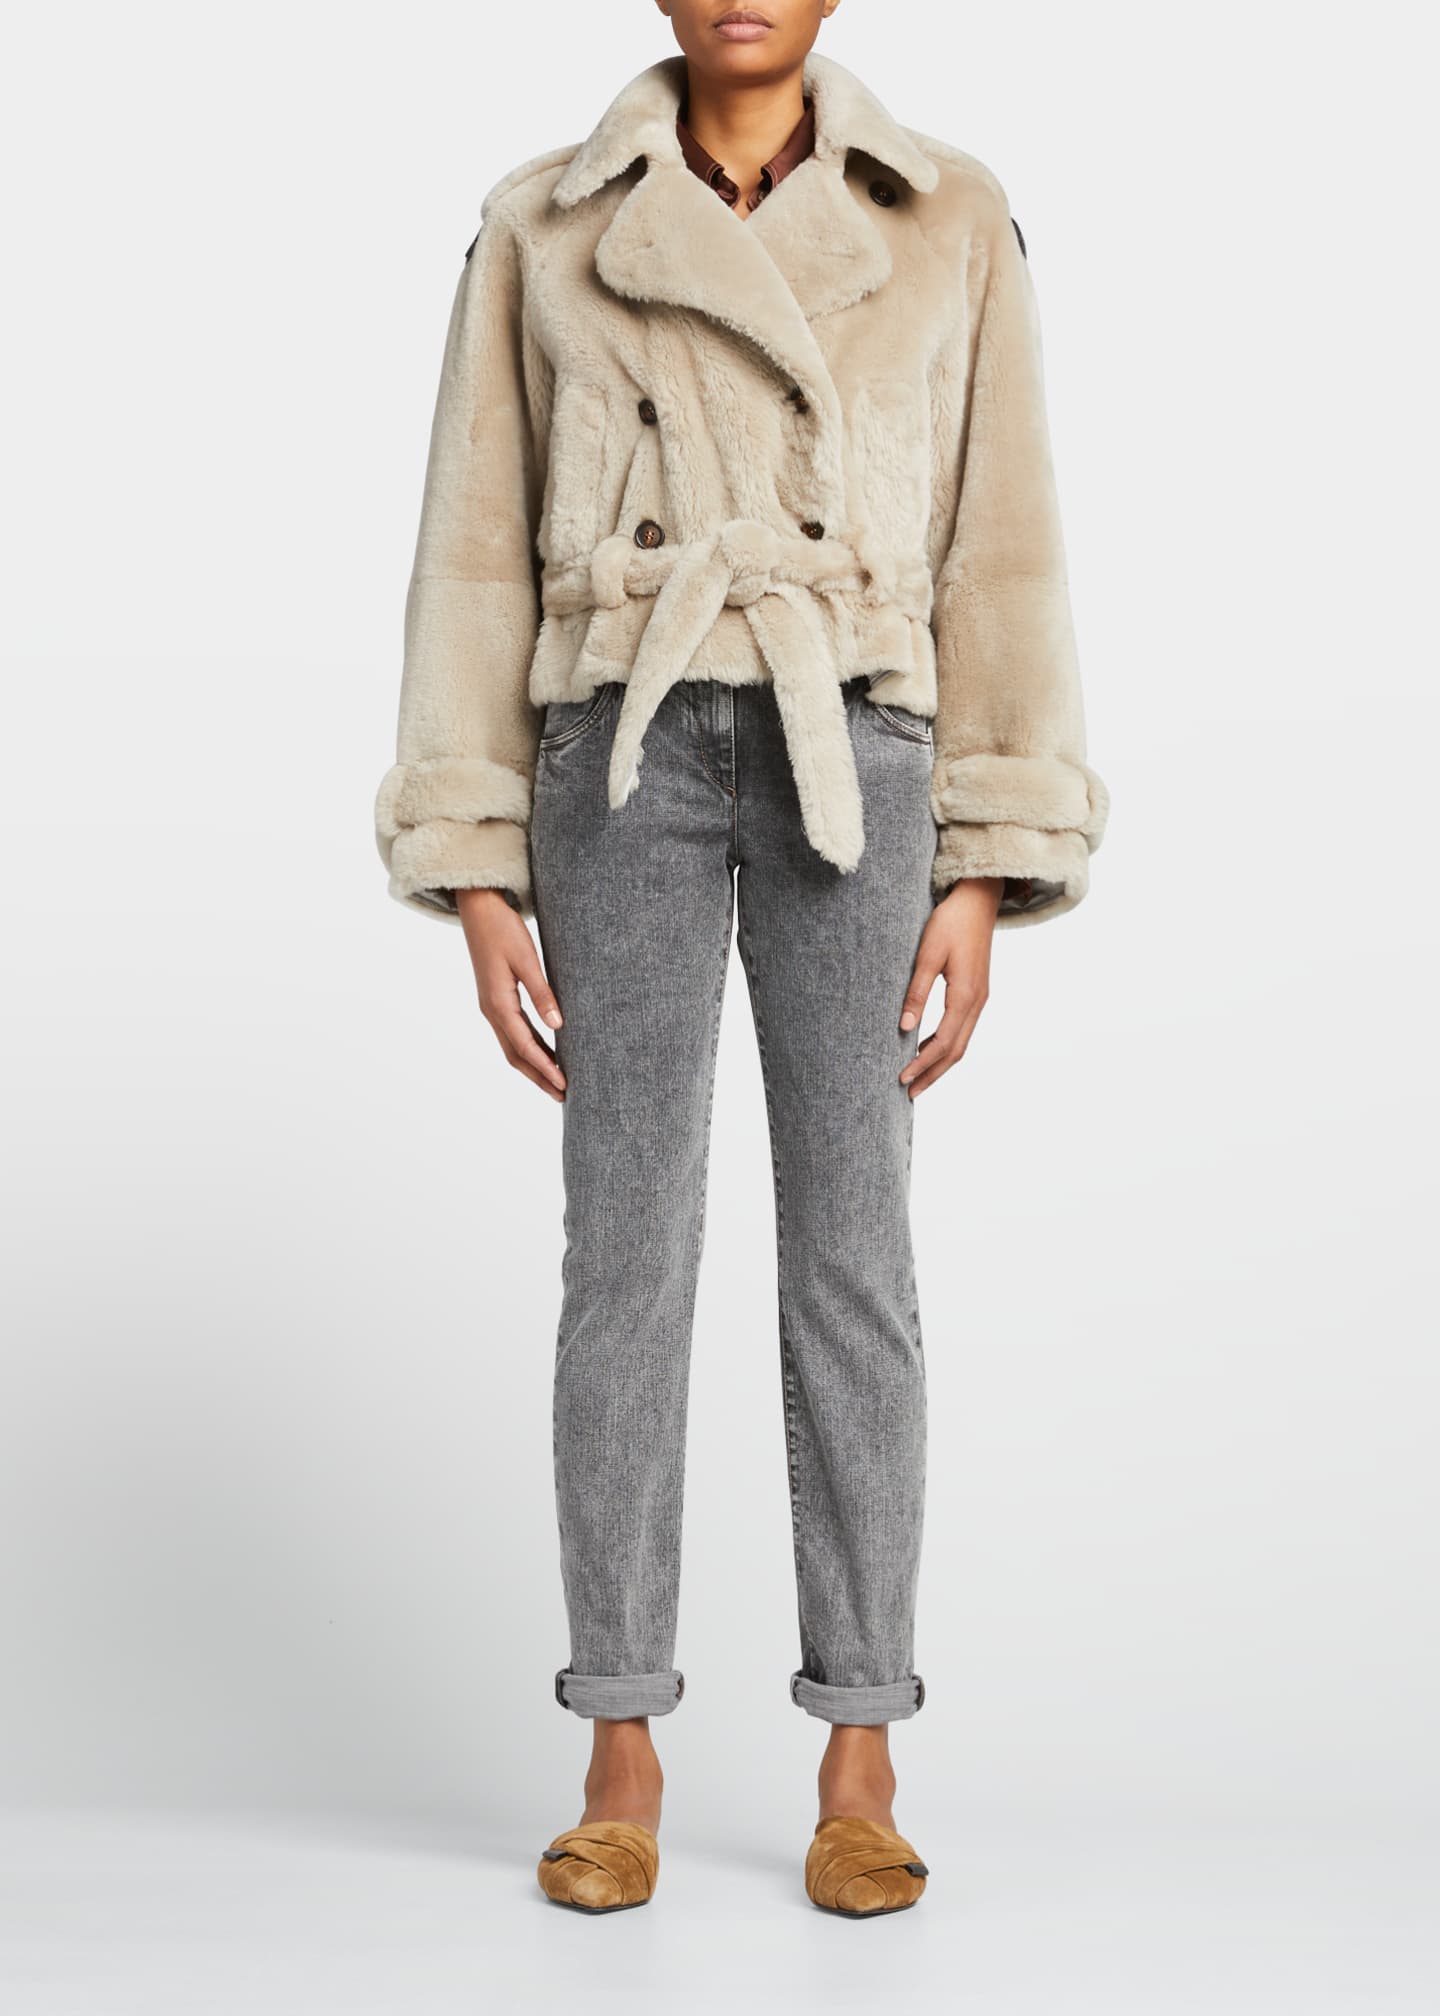 Brunello Cucinelli Shearling Double-Breasted Self-Tie Jacket - Bergdorf ...